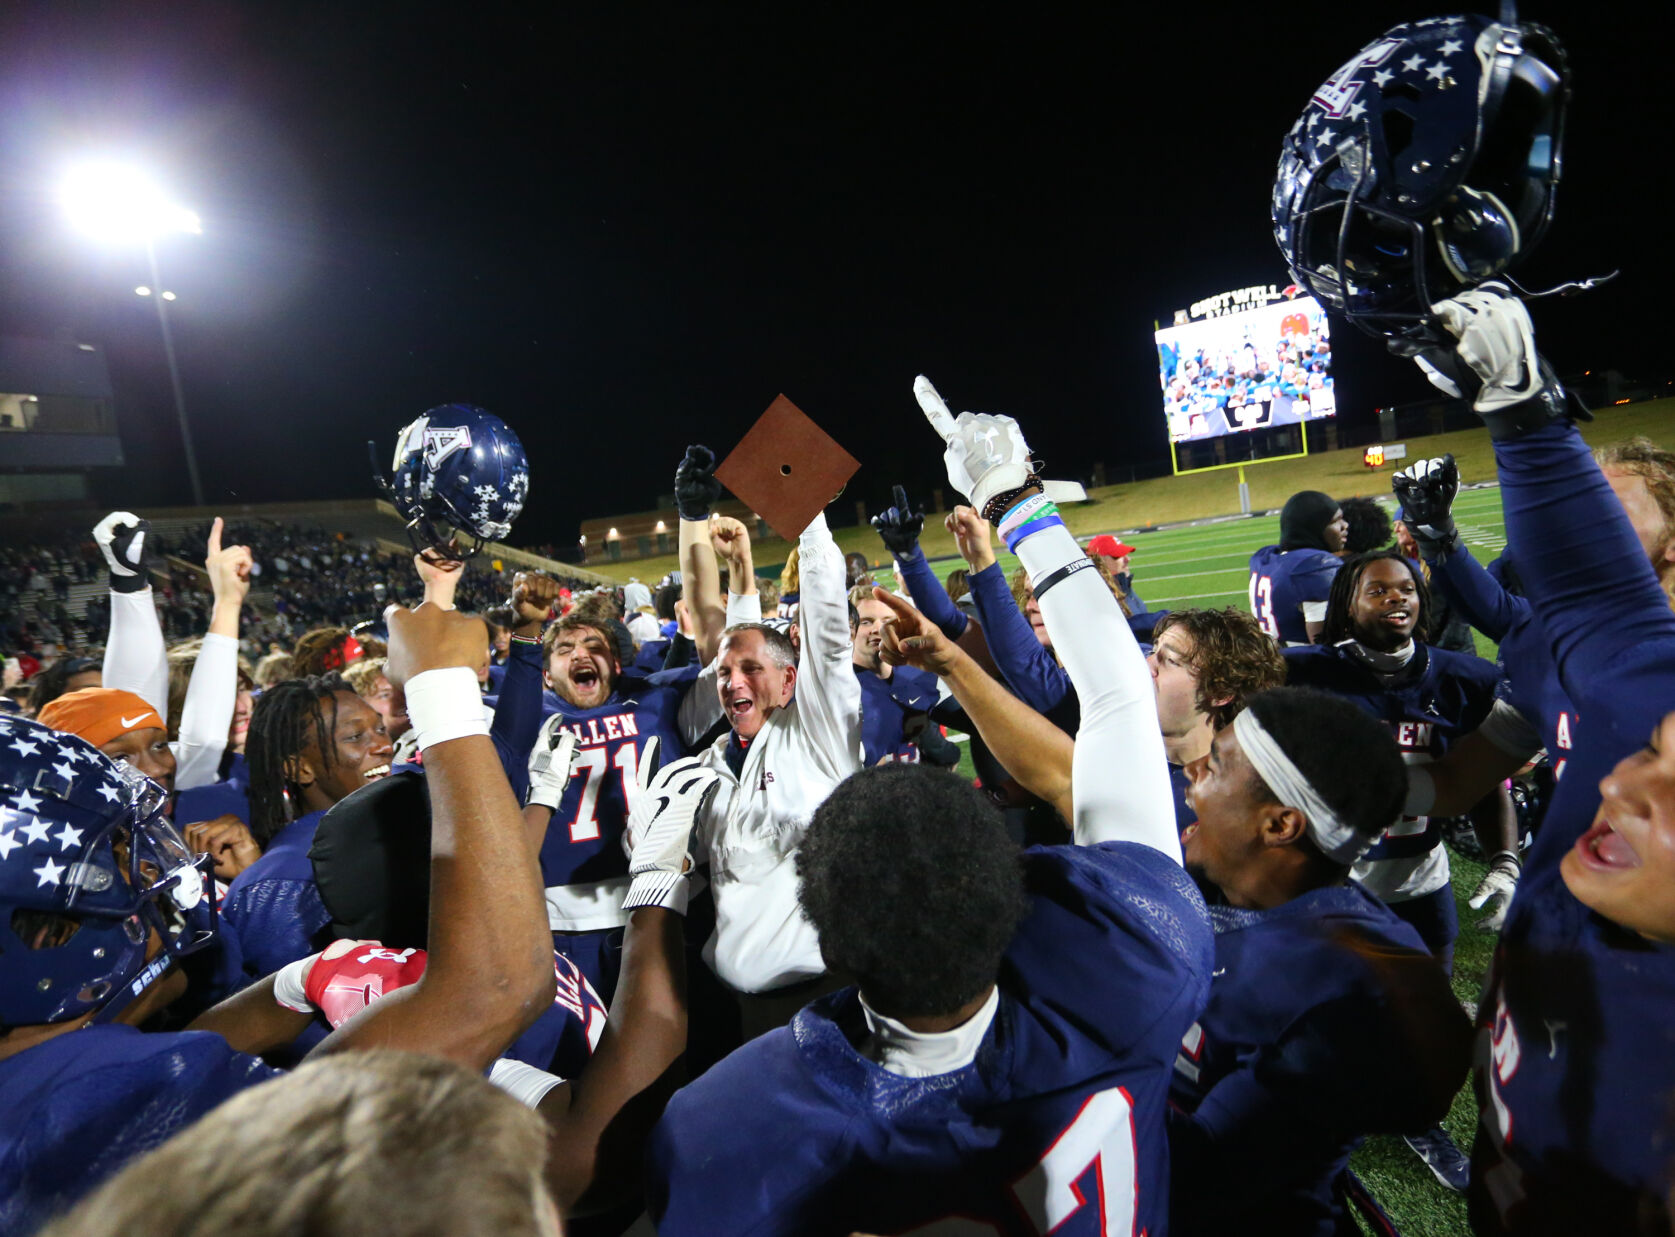 2023 High School Football Season: State Champions Crowned, Allen Eagles Make Regional Finals, Plano East Panthers Clinch Playoff Berth